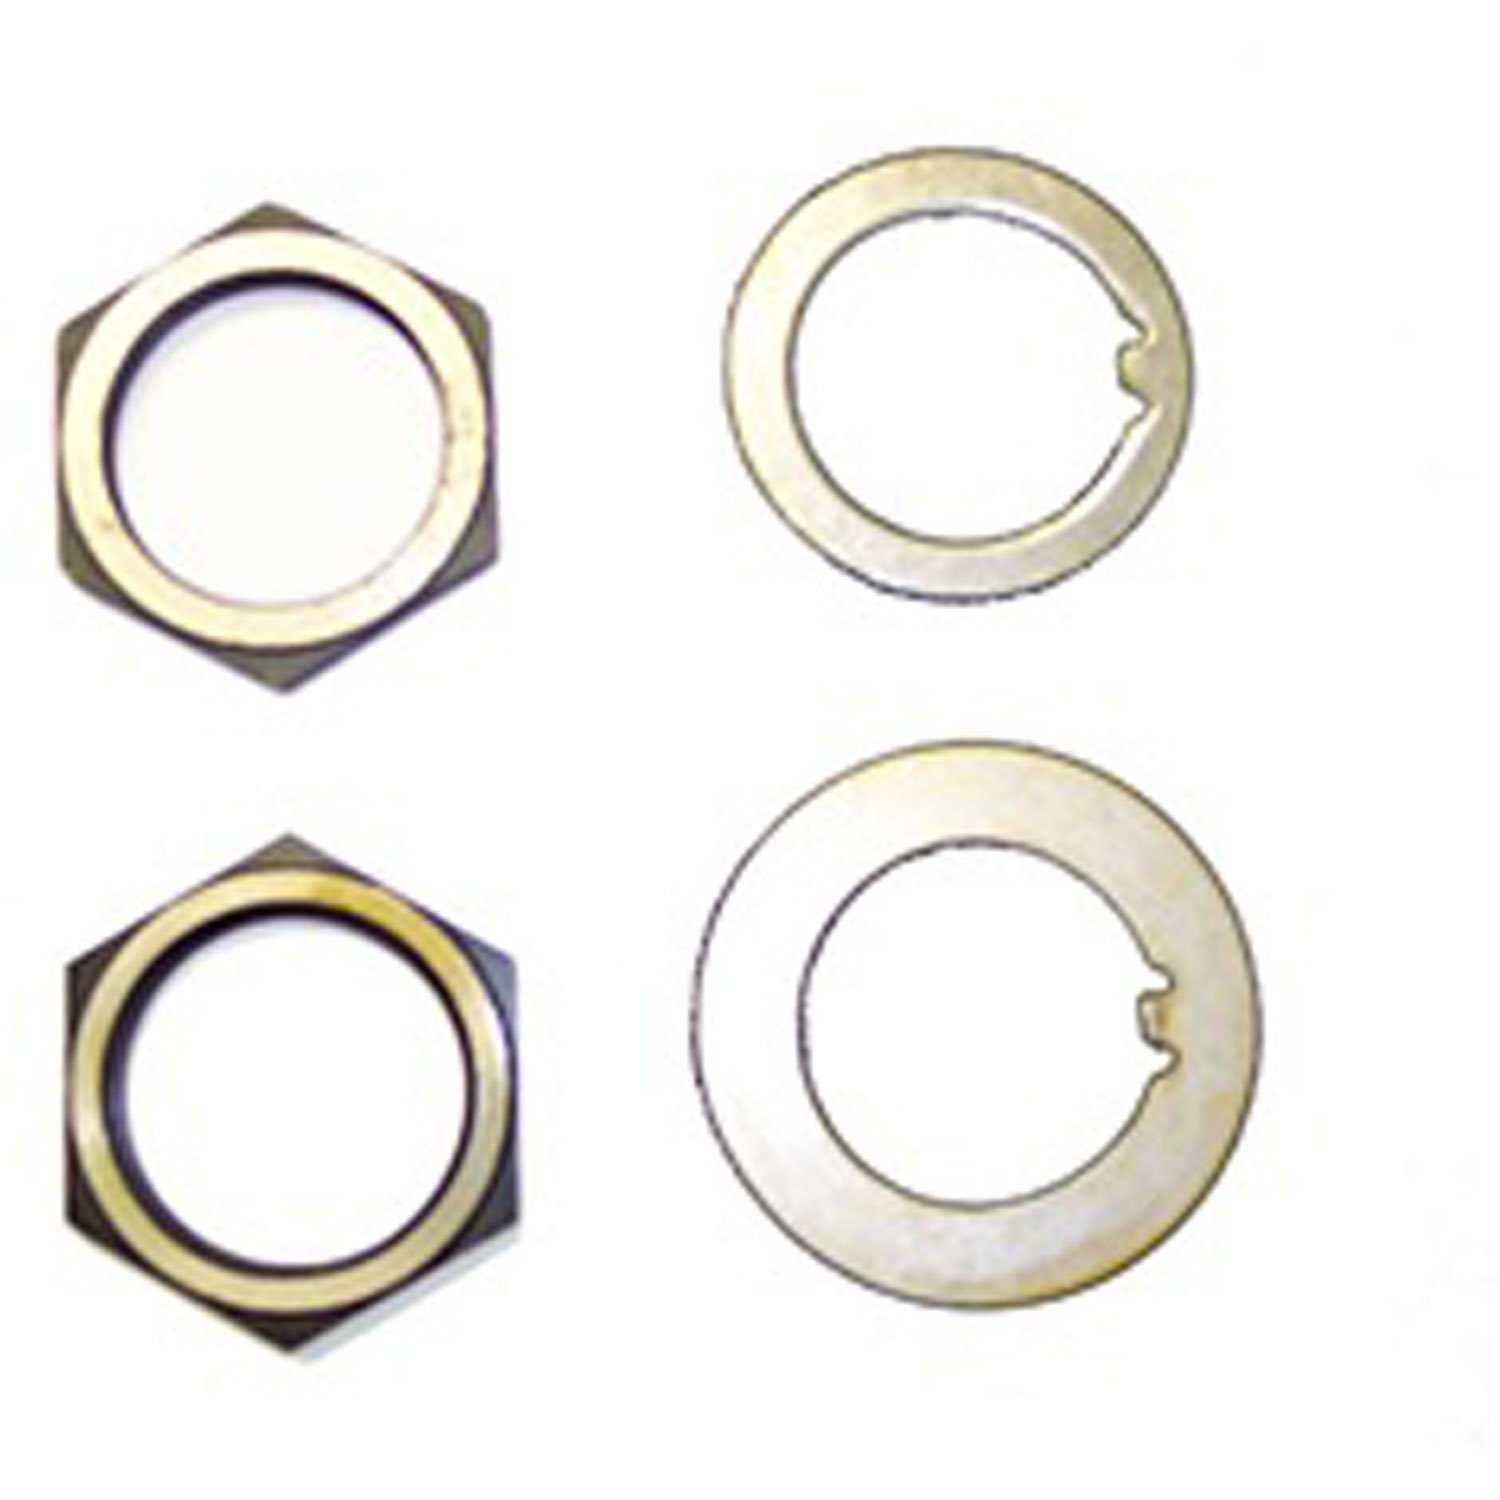 Spindle Nut and Washer Kit for Dana 27 Rear Includes 2 Nuts and 2 Washers 1941-1945 MB 1941-1945 Ford GPW